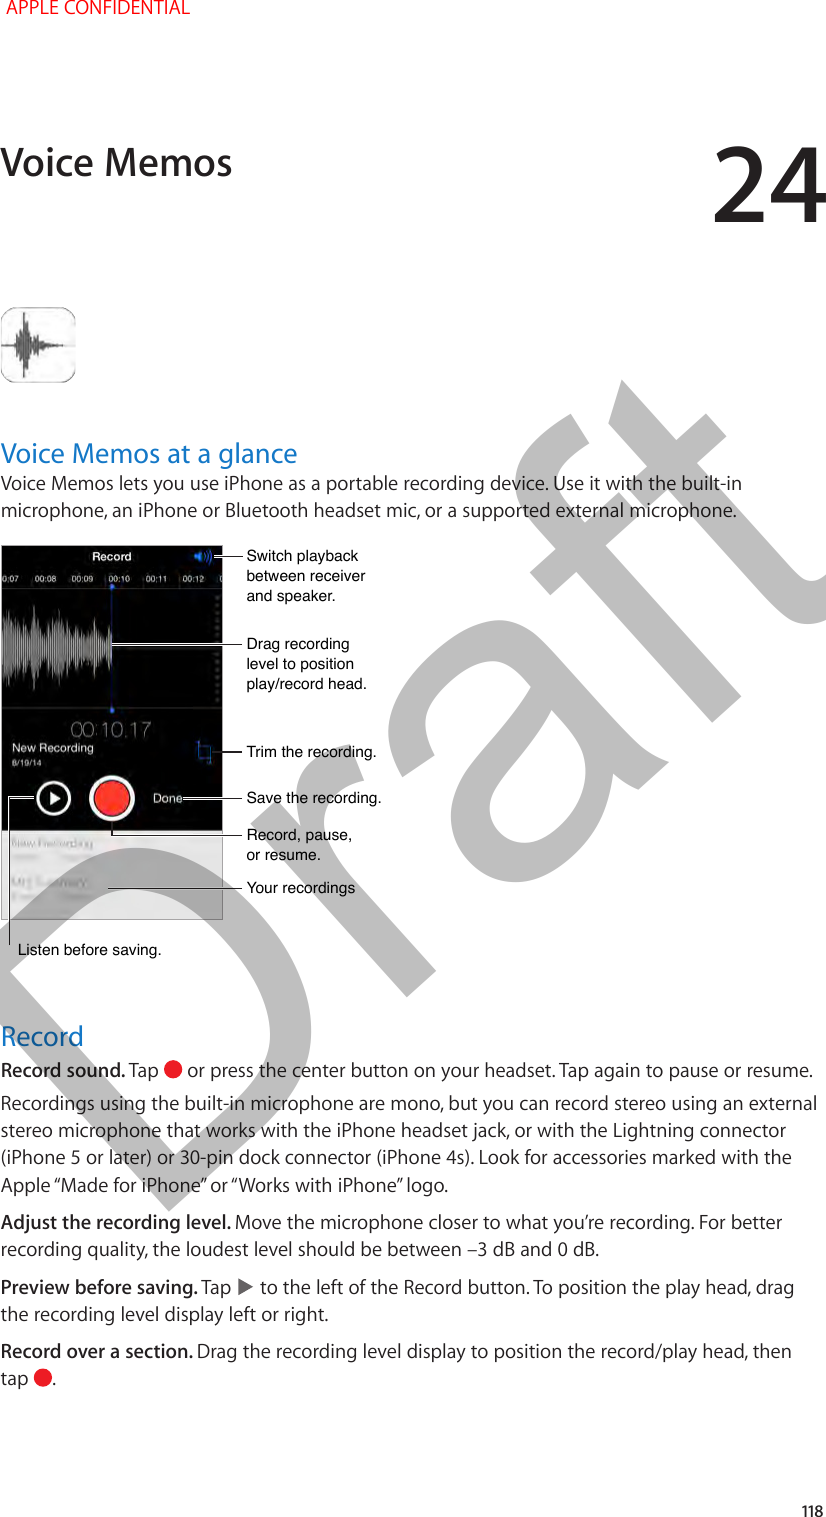 24   118Voice Memos at a glanceVoice Memos lets you use iPhone as a portable recording device. Use it with the built-in microphone, an iPhone or Bluetooth headset mic, or a supported external microphone.Drag recording level to position play/record head.Drag recording level to position play/record head.Record, pause, or resume.Record, pause, or resume.Trim the recording.Trim the recording.Switch playback between receiver and speaker.Switch playback between receiver and speaker.Save the recording.Save the recording.Your recordingsYour recordingsListen before saving.Listen before saving.RecordRecord sound. Tap   or press the center button on your headset. Tap again to pause or resume.Recordings using the built-in microphone are mono, but you can record stereo using an external stereo microphone that works with the iPhone headset jack, or with the Lightning connector (iPhone 5 or later) or 30-pin dock connector (iPhone 4s). Look for accessories marked with the Apple “Made for iPhone” or “Works with iPhone” logo.Adjust the recording level. Move the microphone closer to what you’re recording. For better recording quality, the loudest level should be between –3 dB and 0 dB.Preview before saving. Tap   to the left of the Record button. To position the play head, drag the recording level display left or right.Record over a section. Drag the recording level display to position the record/play head, then tap  .Voice Memos APPLE CONFIDENTIALDraft